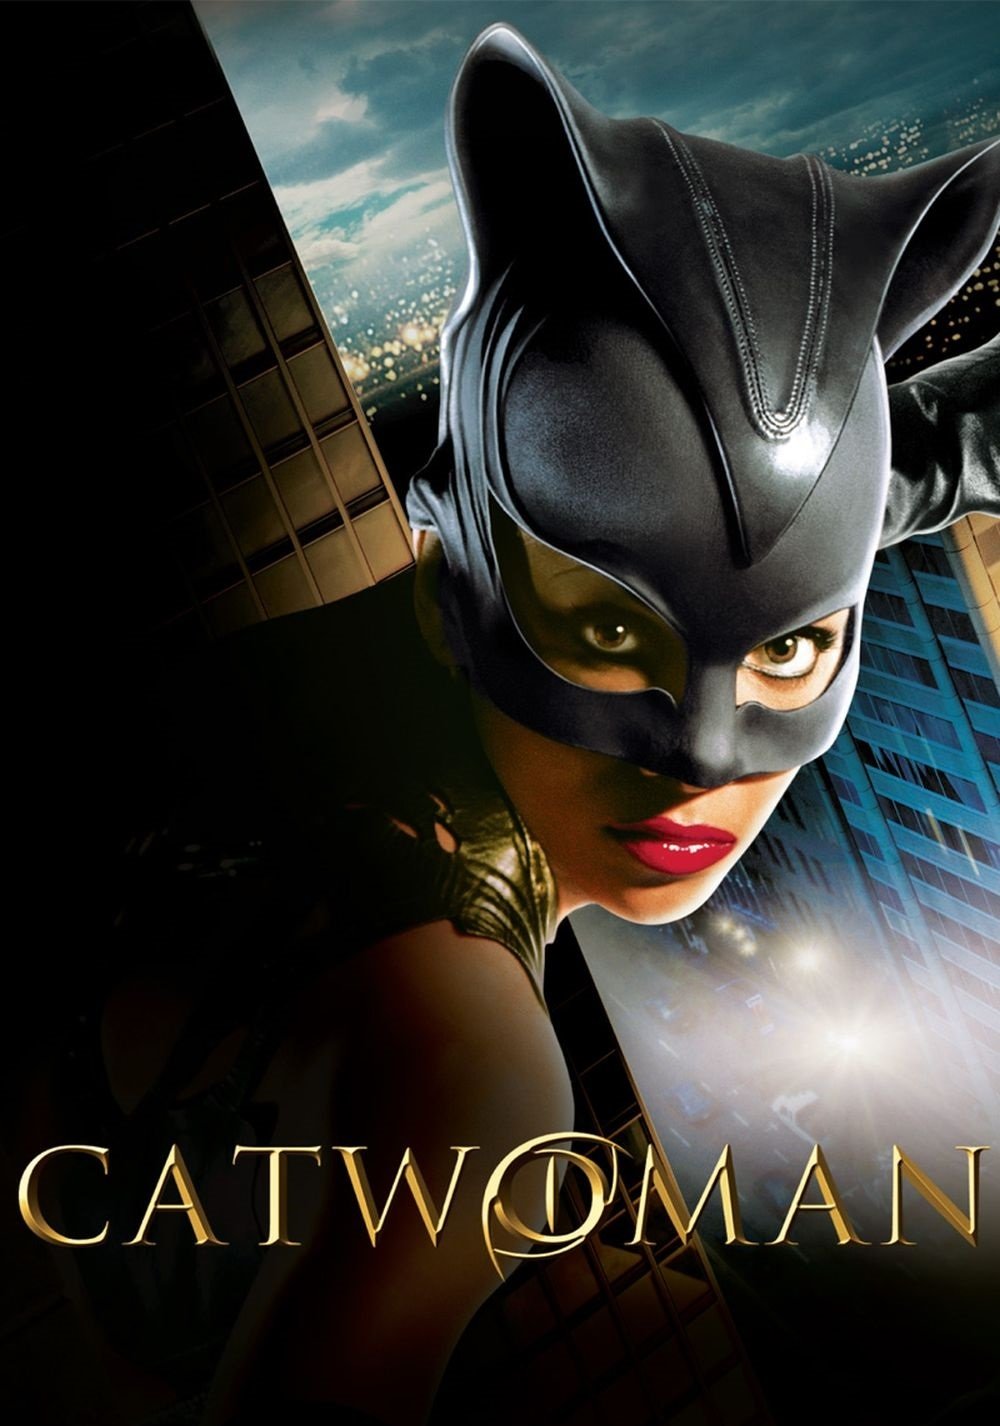 Catwoman Movie Poster - ID: 80180 - Image Abyss